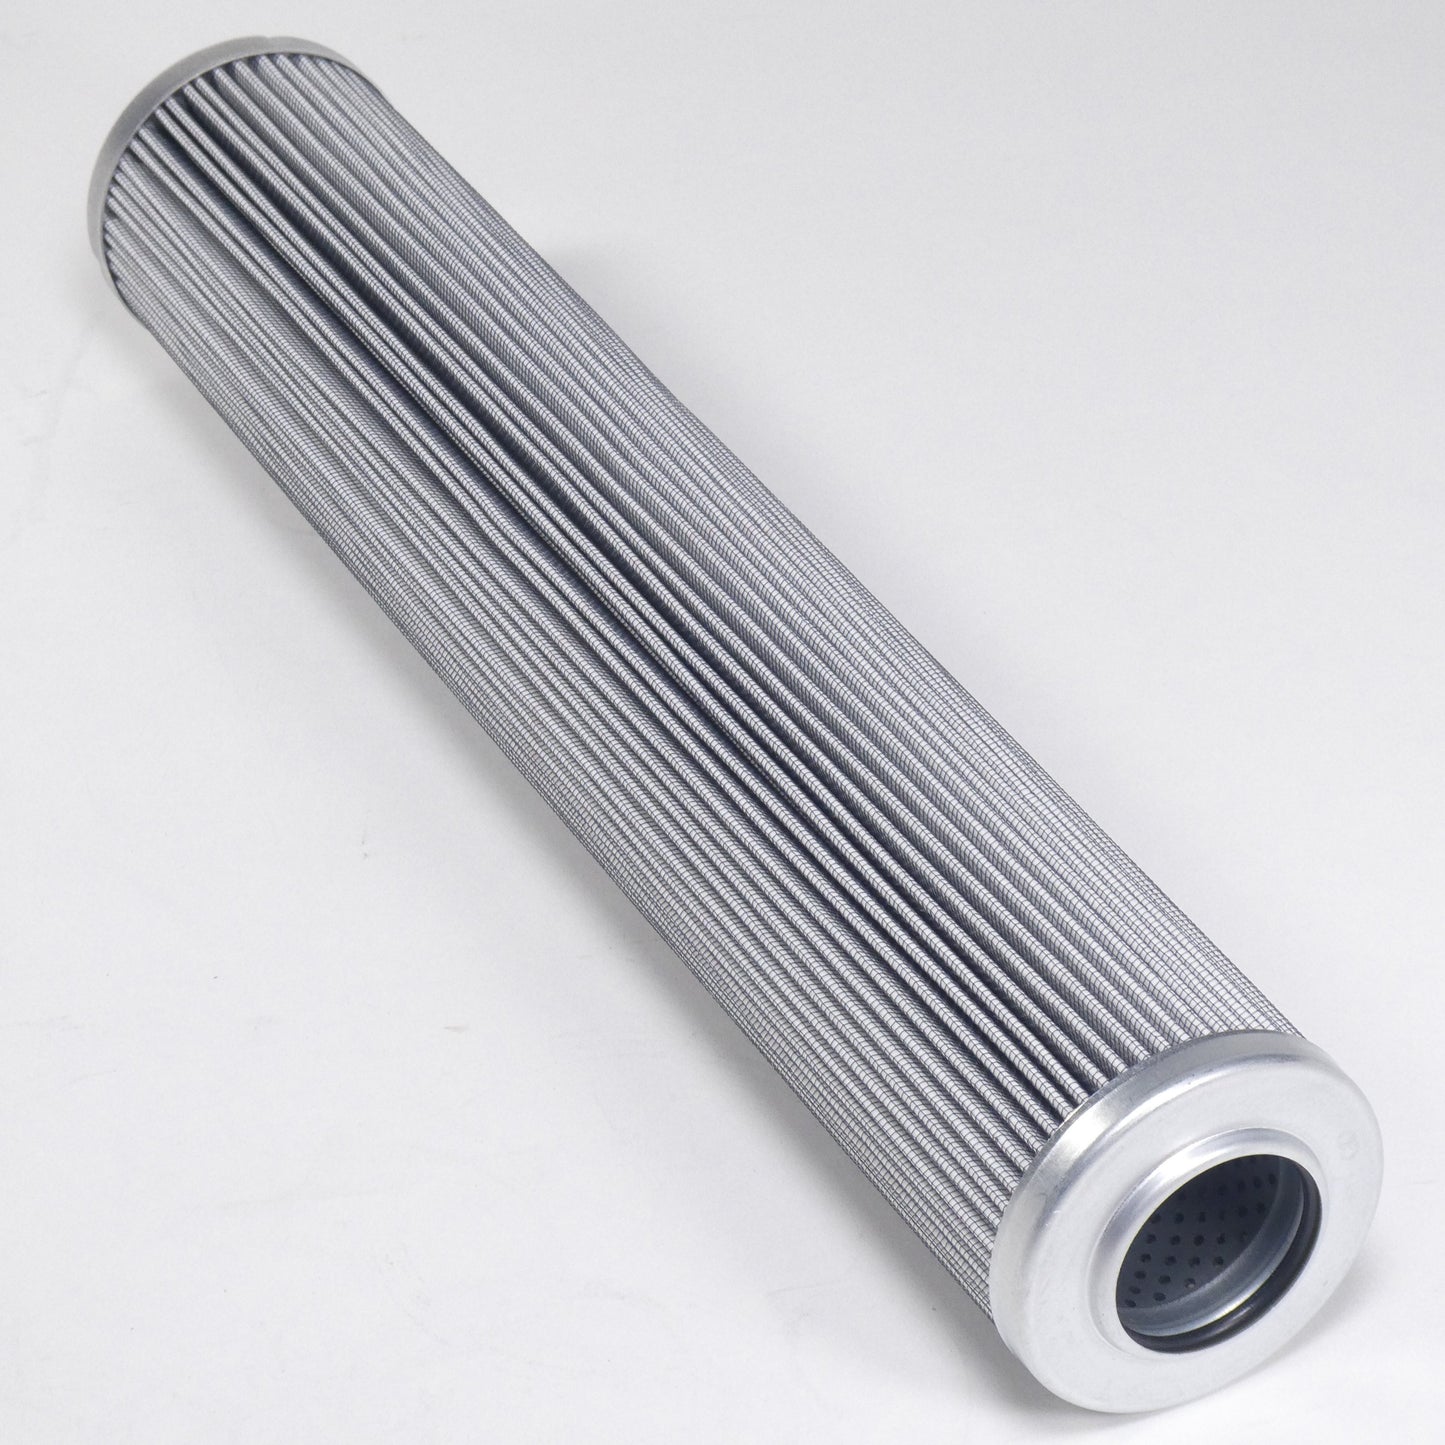 Hydrafil Replacement Filter Element for Hilco 3830-12-089-C